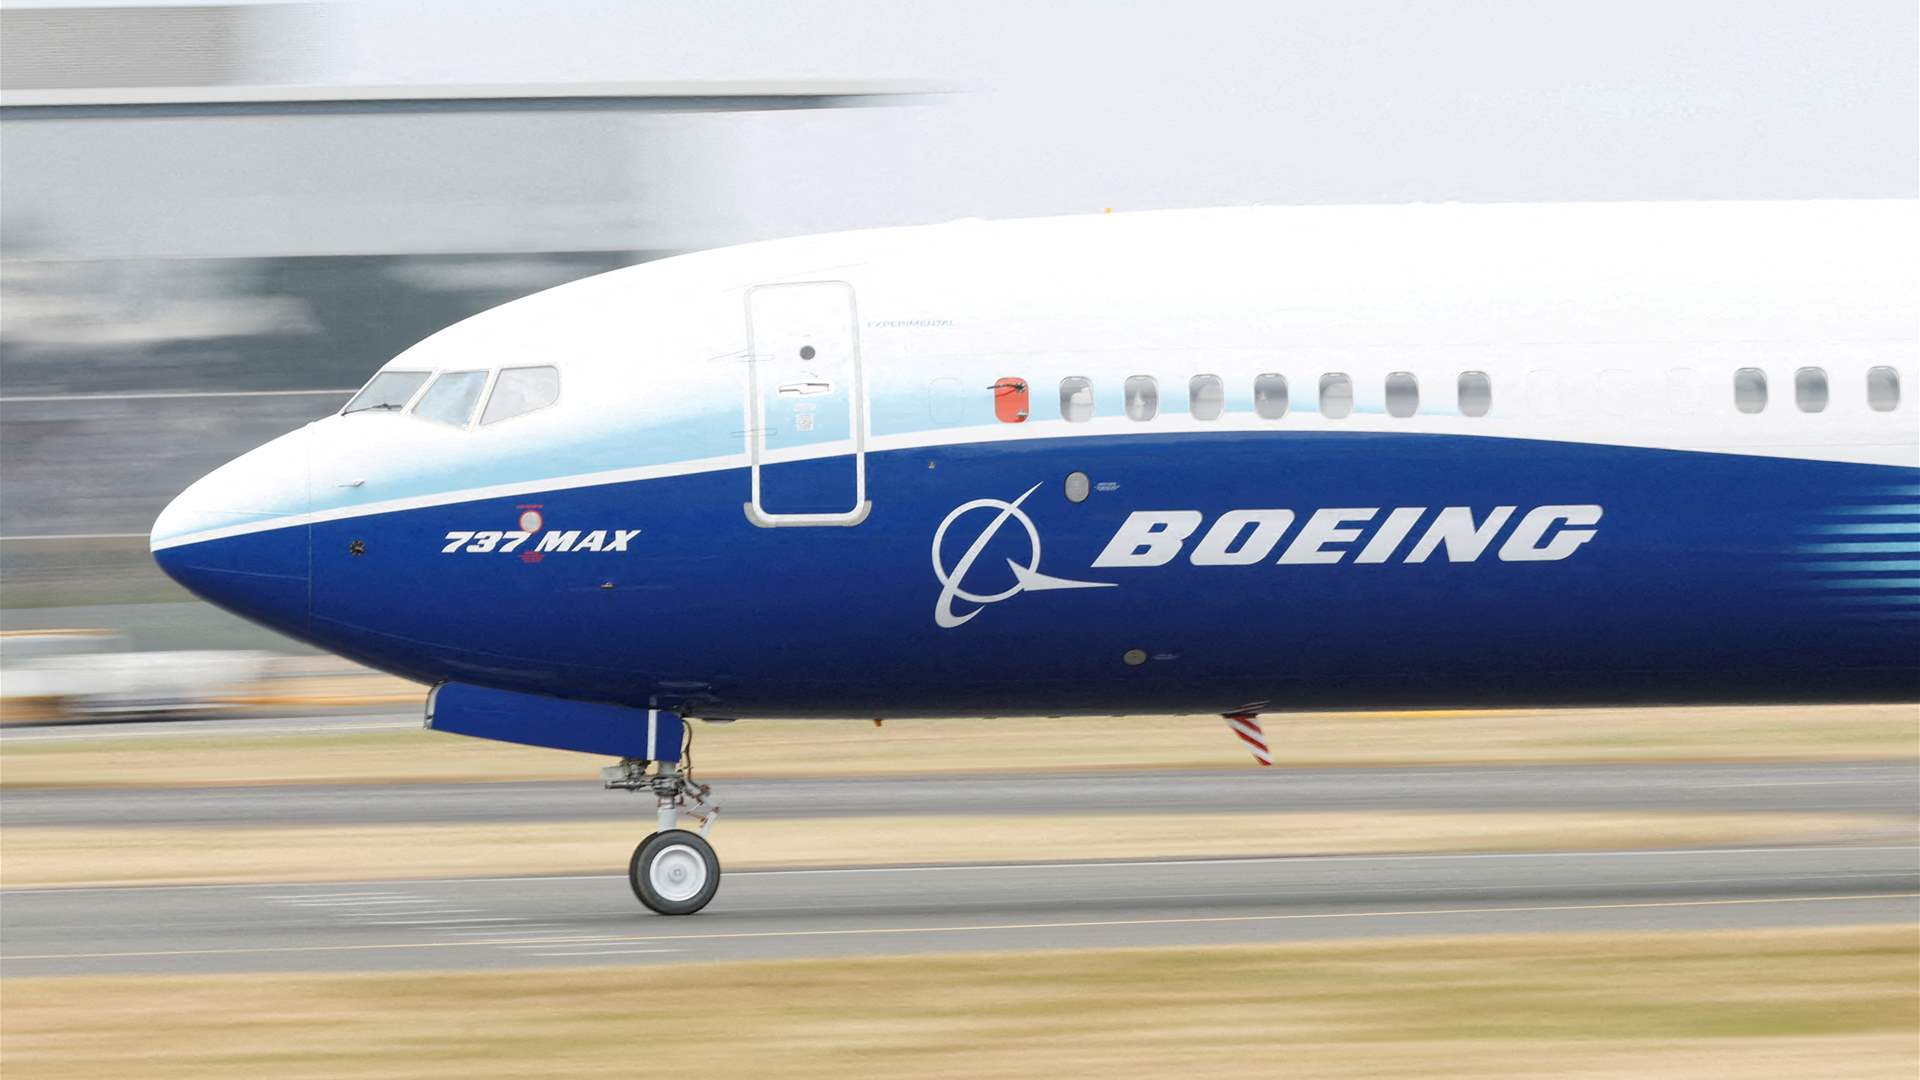 Boeing announces firm order for 35 737 MAX aircraft